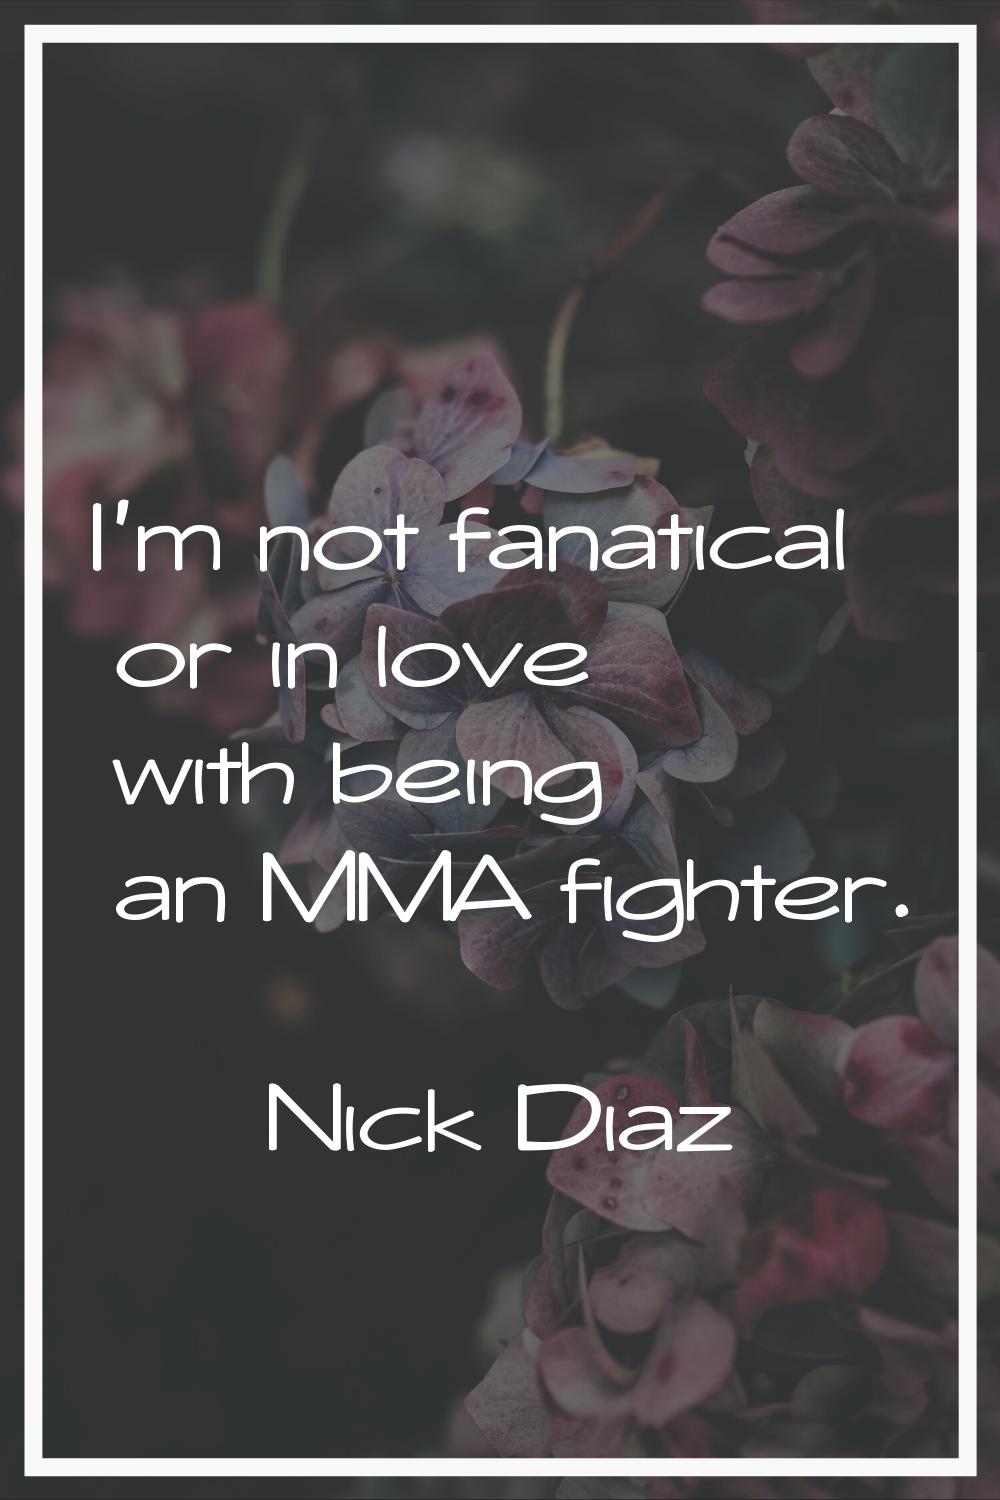 I'm not fanatical or in love with being an MMA fighter.